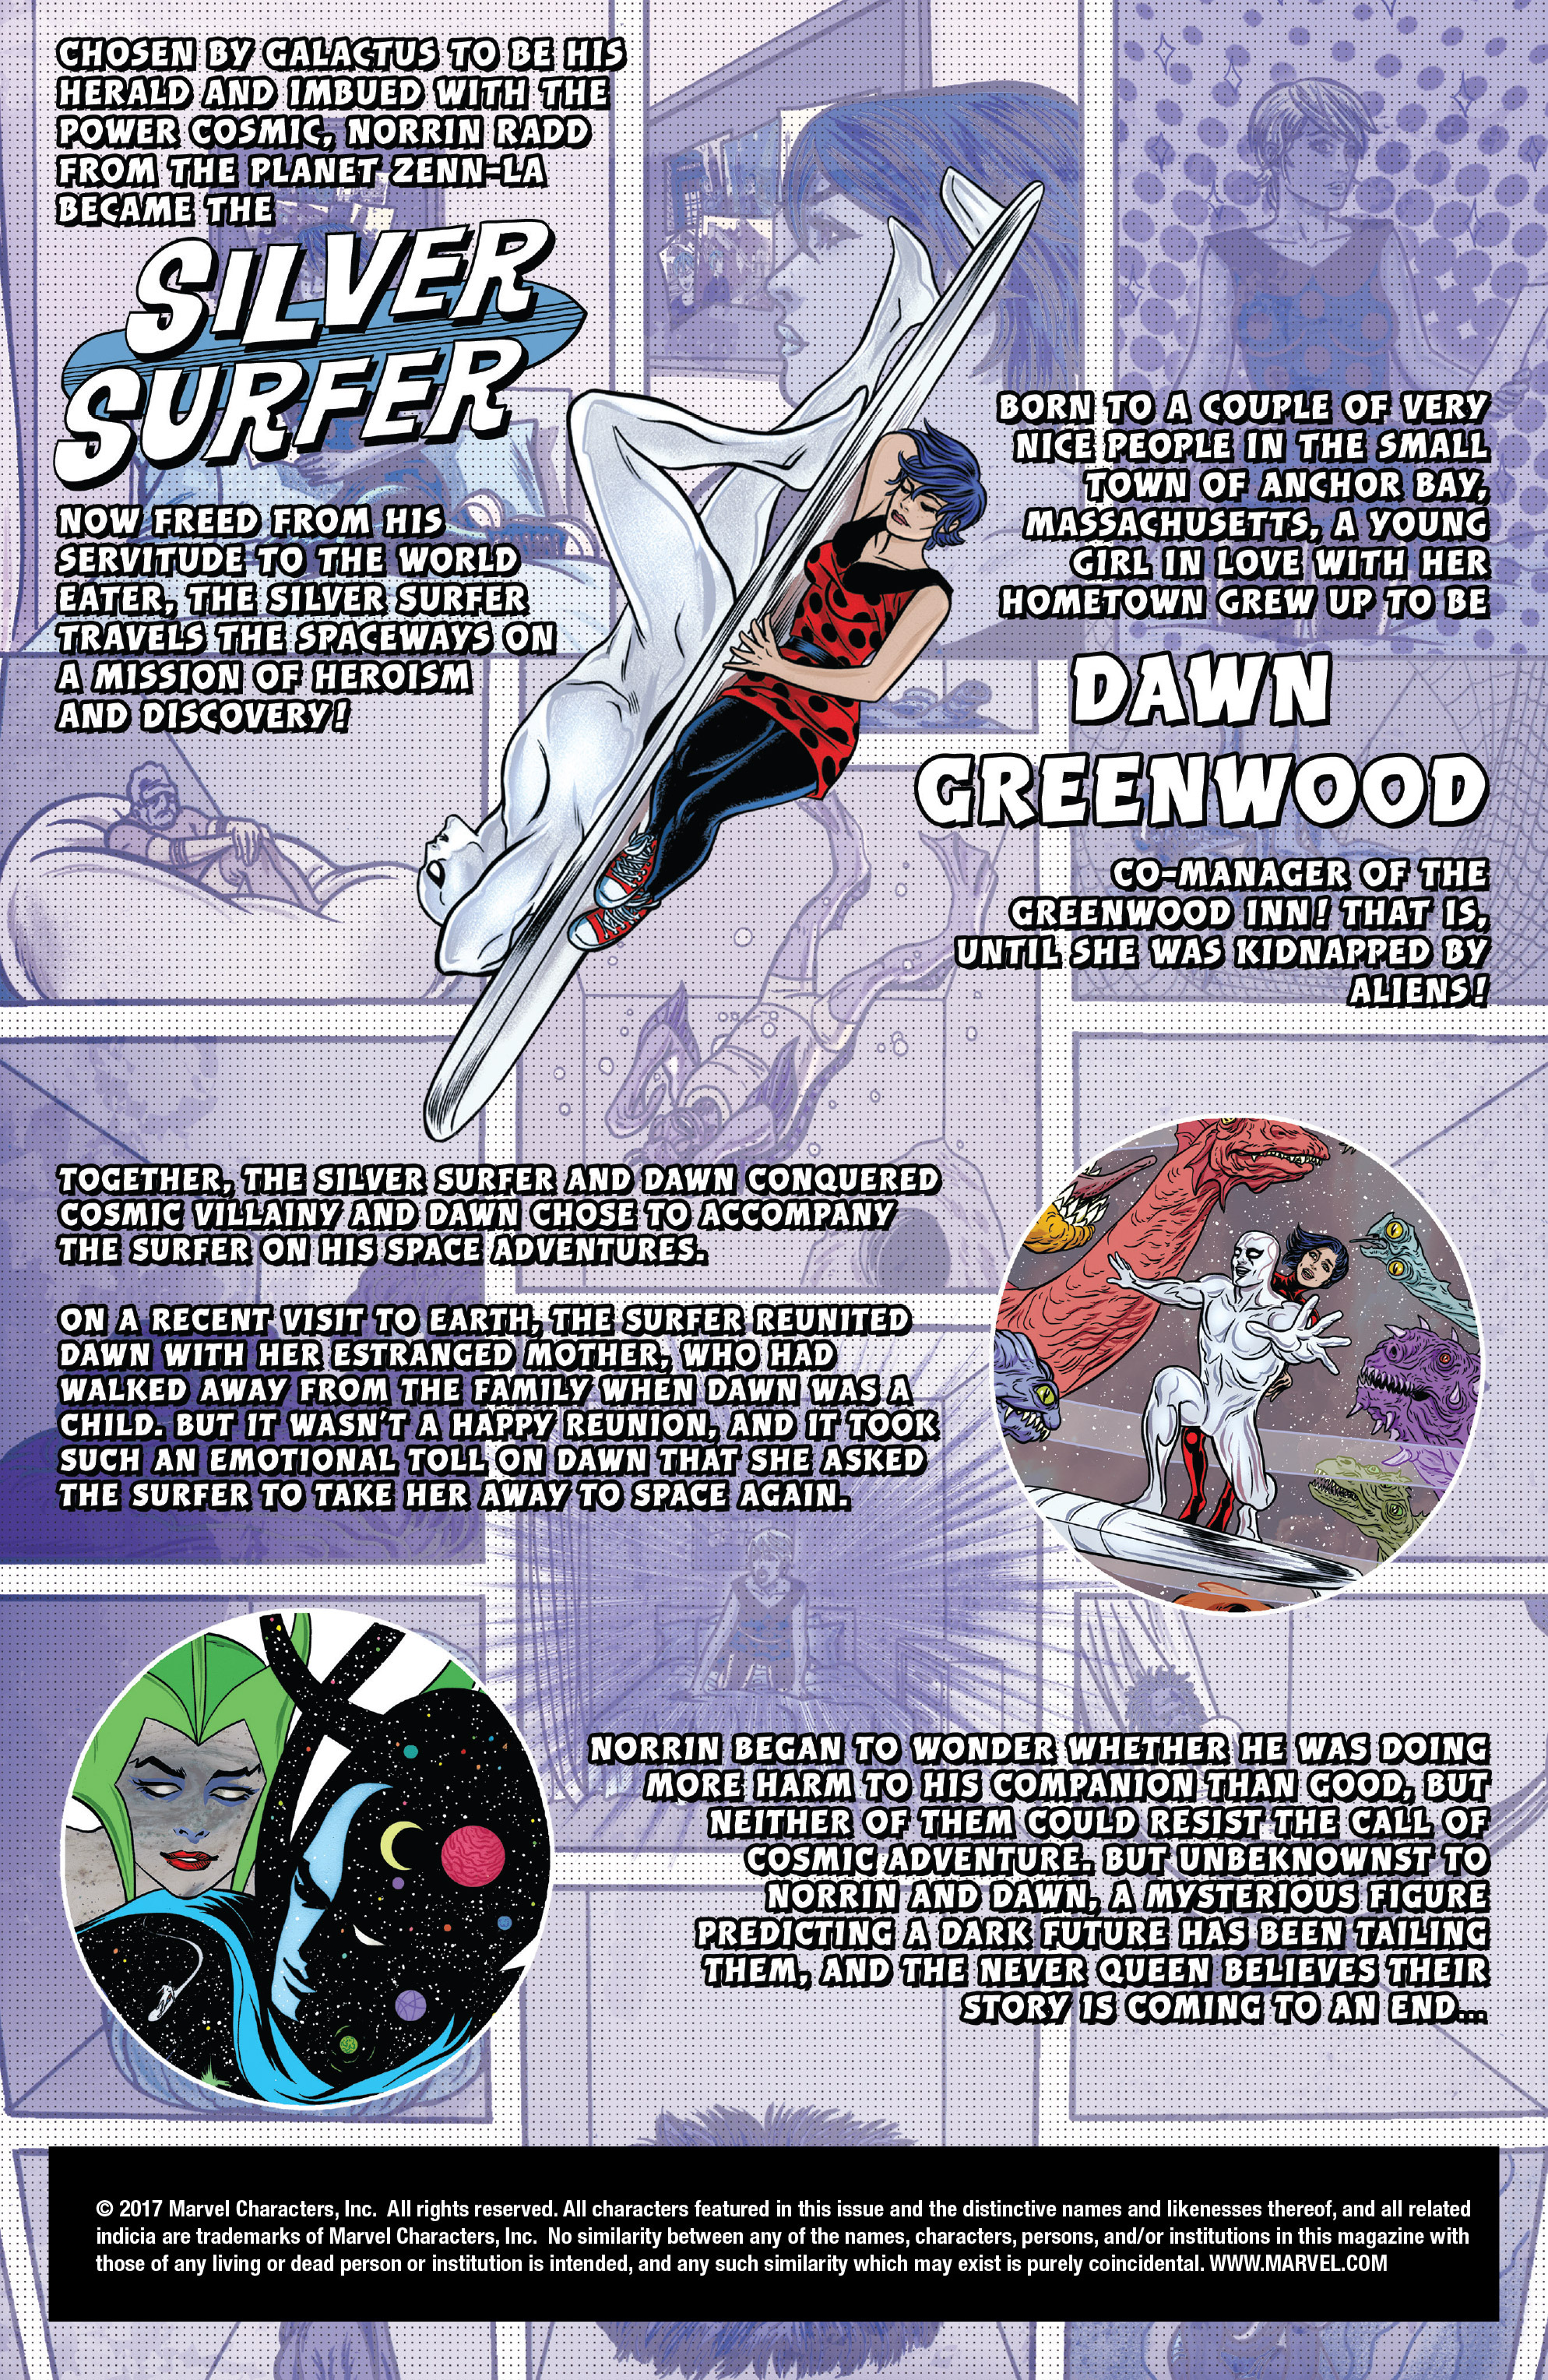 Silver Surfer (2016-): Chapter 9 - Page 2